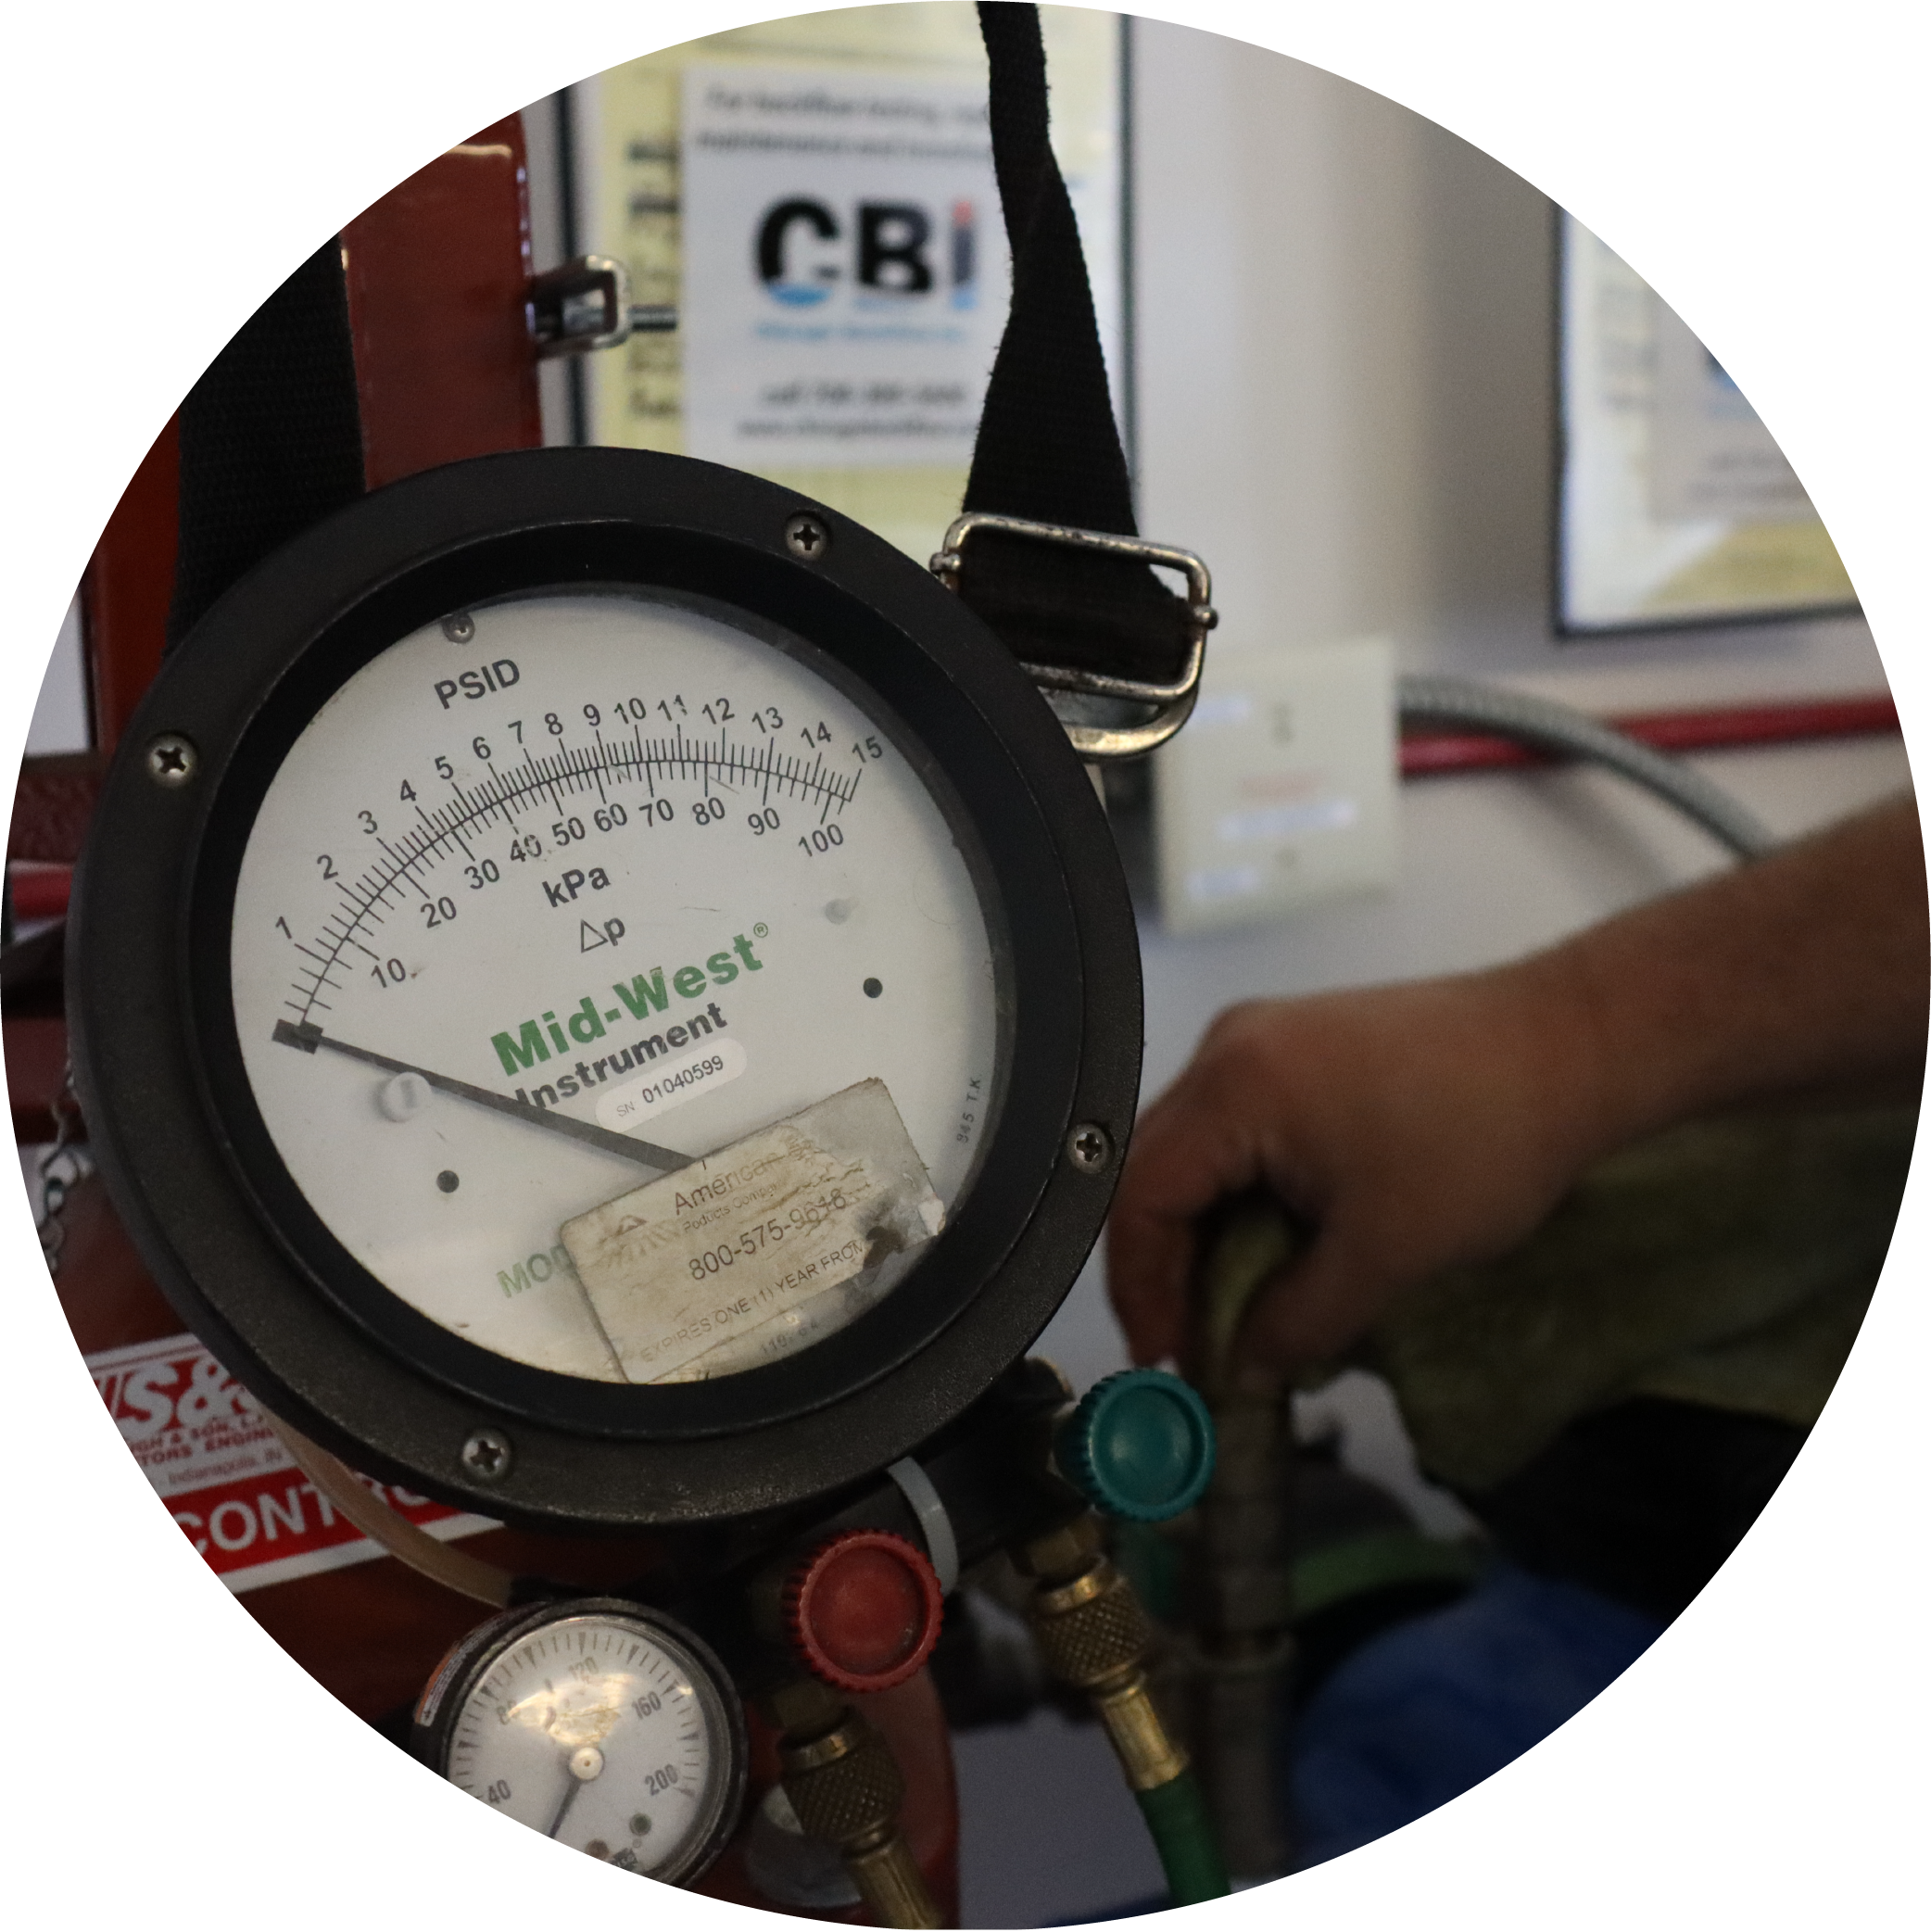 A test gauge that is being used on a backflow device.